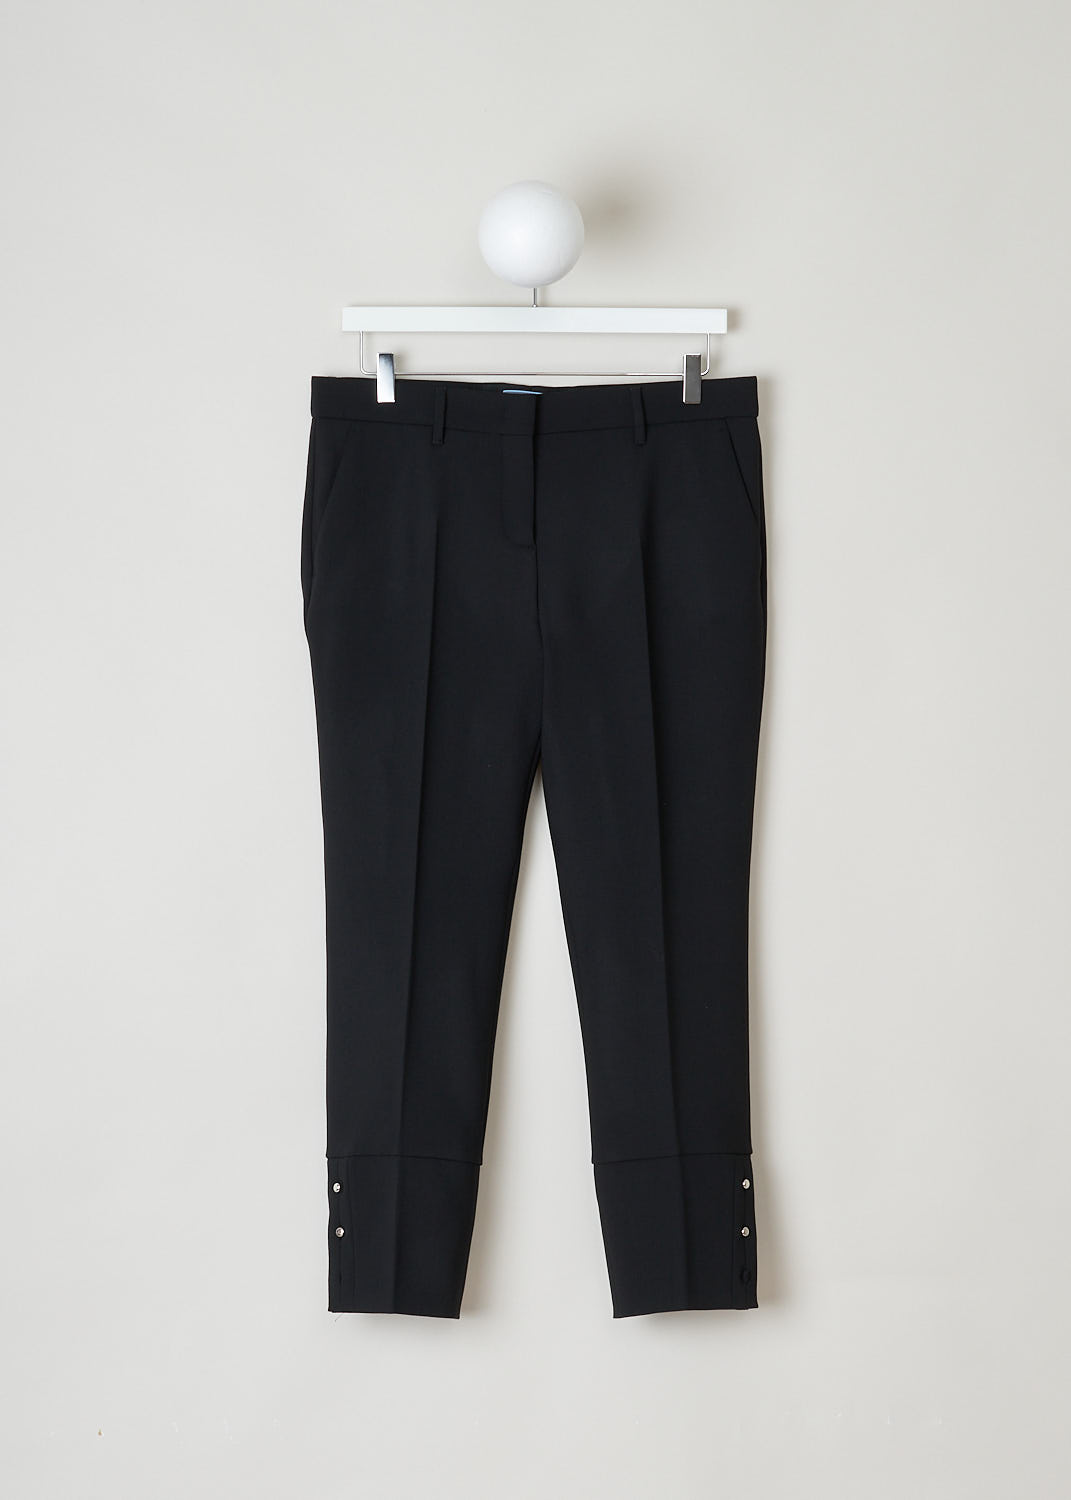 Prada, Black wool pants, Tela_Natte_STR_P2291_F0002_Nero, black, front, Made in the classic pants model. What sets this model apart is the hem, which comes adorned with a buttoned split. 